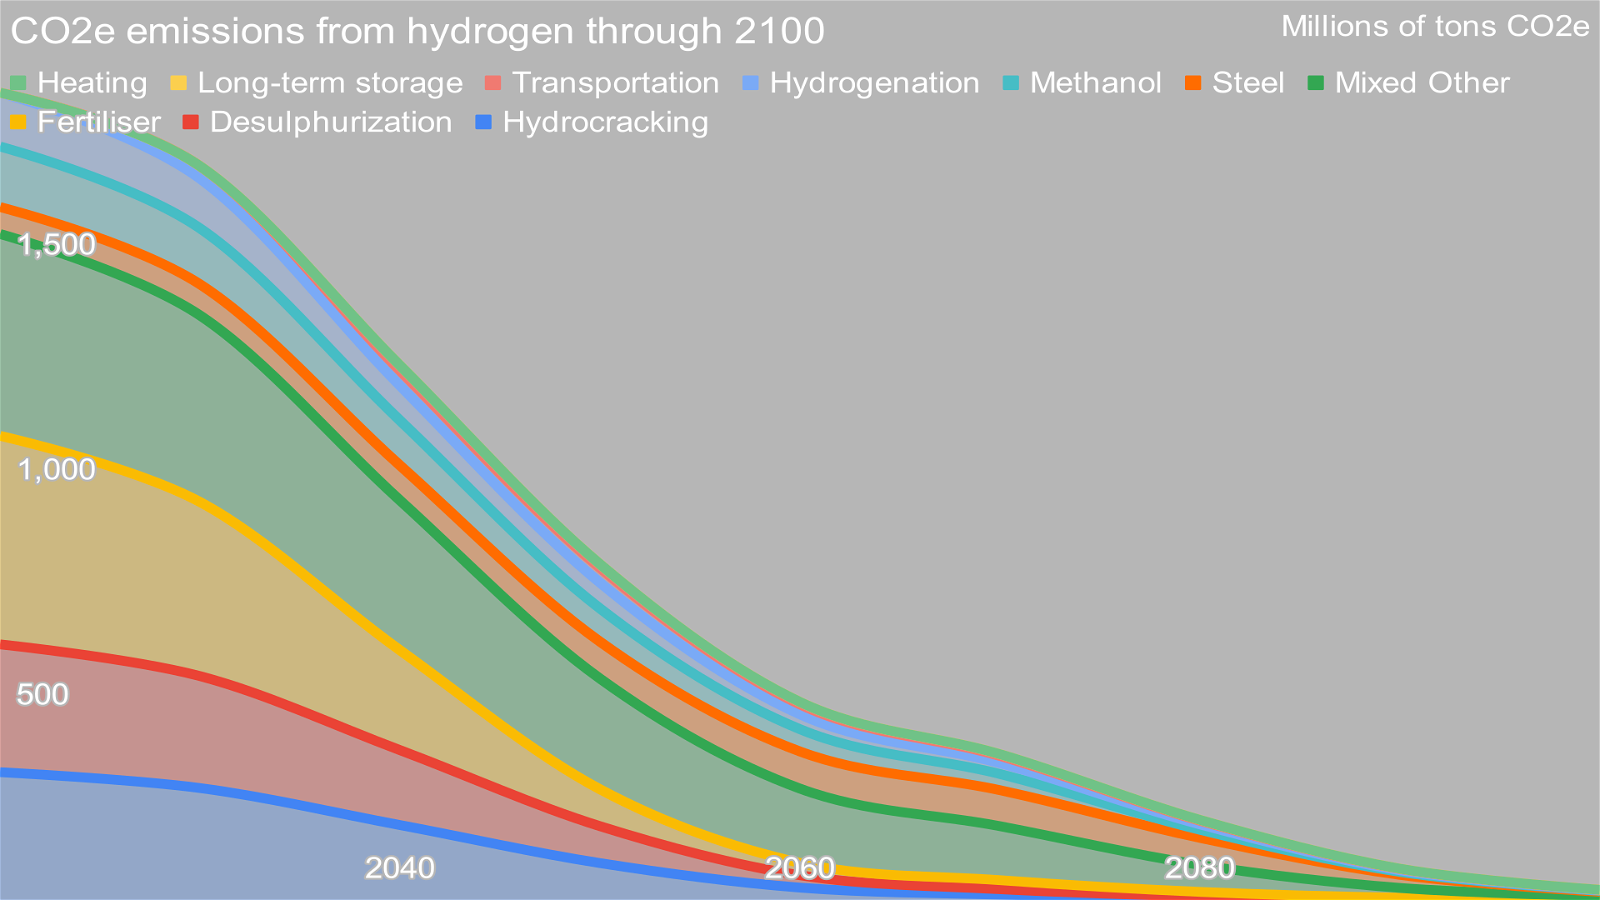 Figure 2: CO2e emissions from hydrogen through 2100 by author
